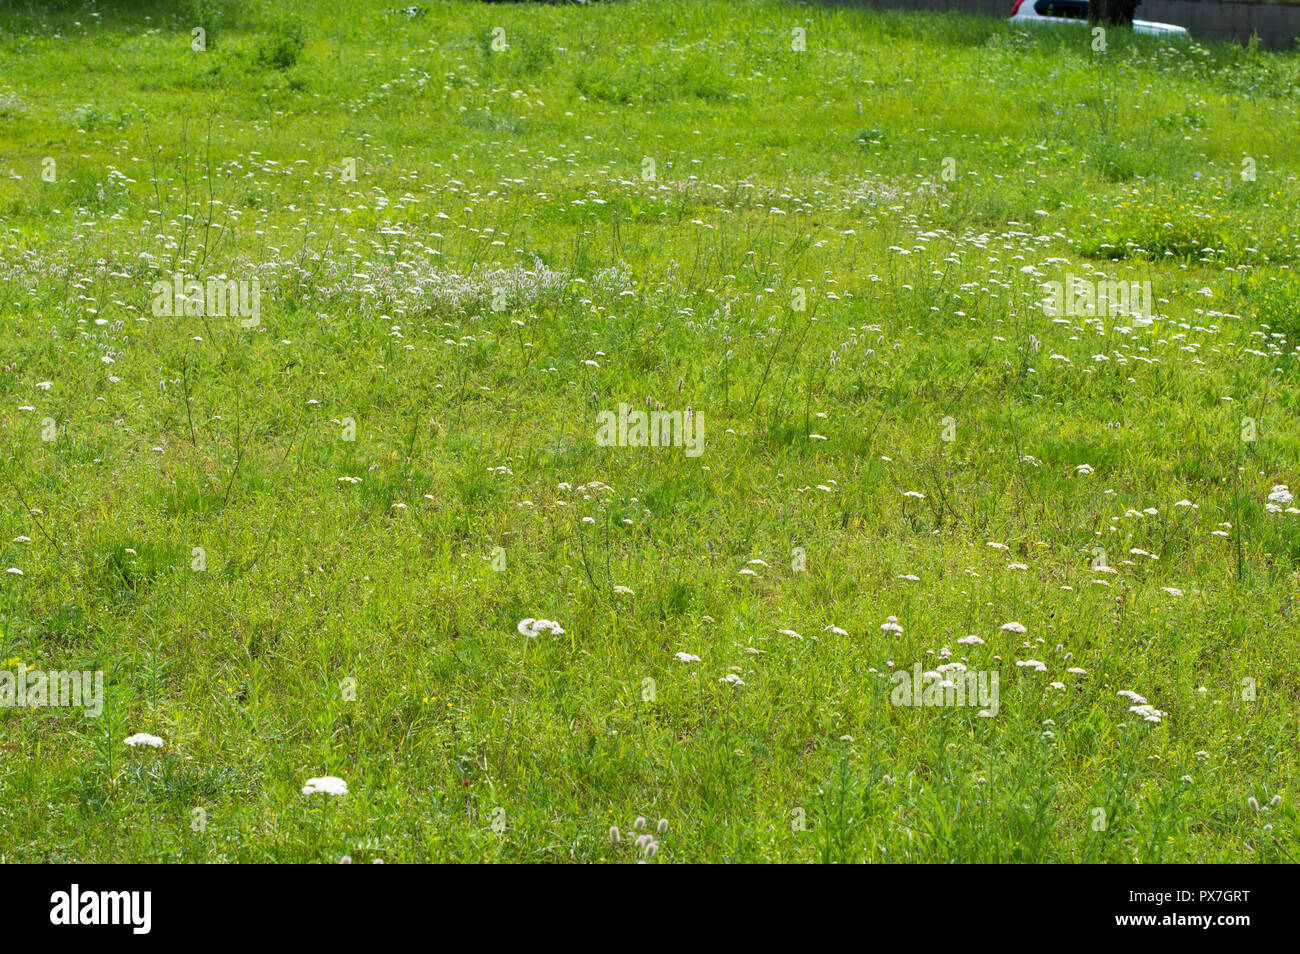 General view of the green glade. Flowers; Chicken, chicory and green meadow grass. Summer landscape on a sunny day. Stock Photo